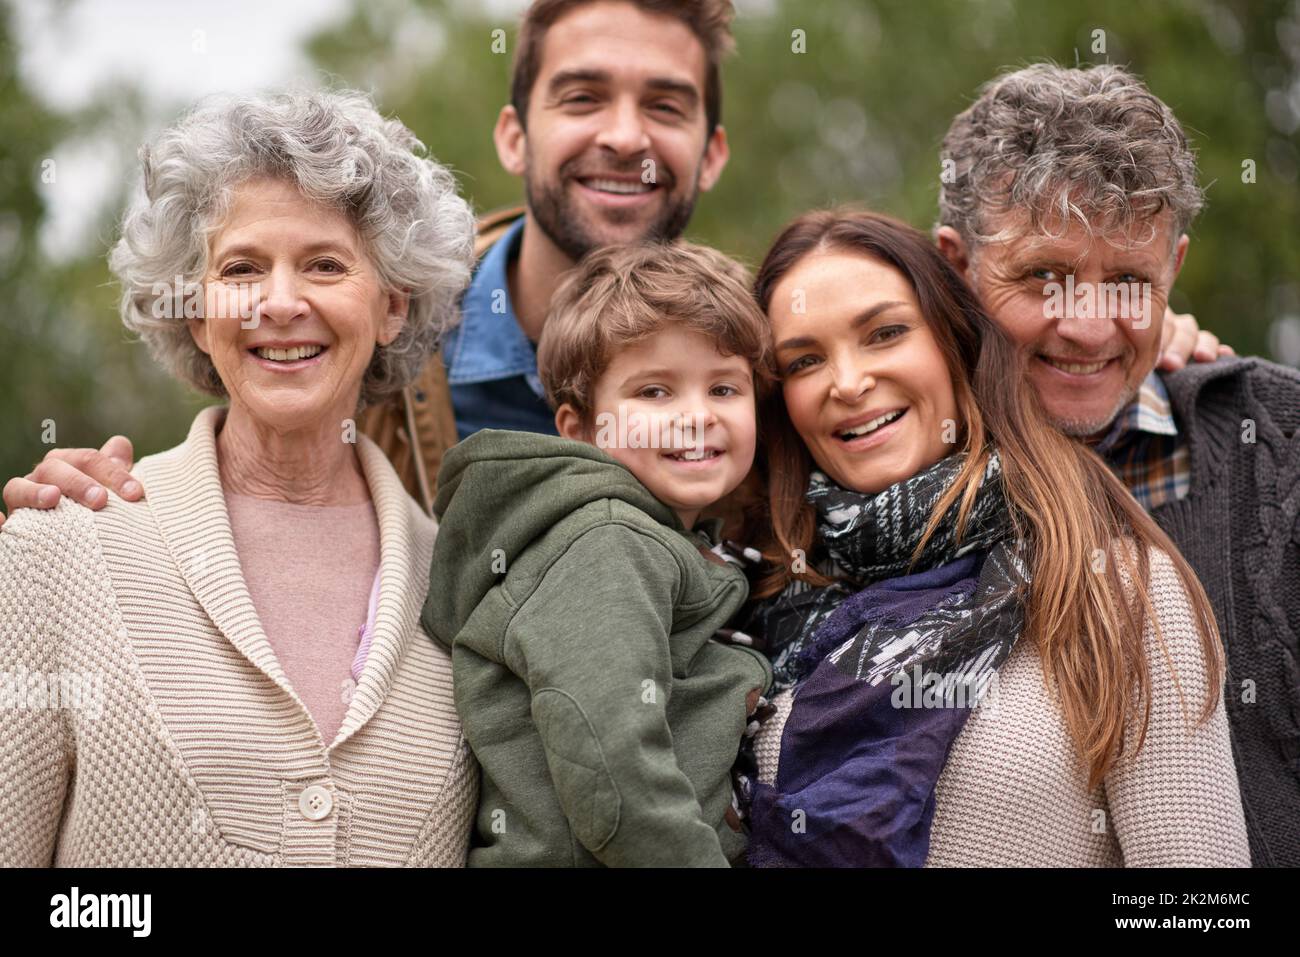 Nothing comes close to the bond of family. Three generations of family enjoying a day out in the park together. Stock Photo